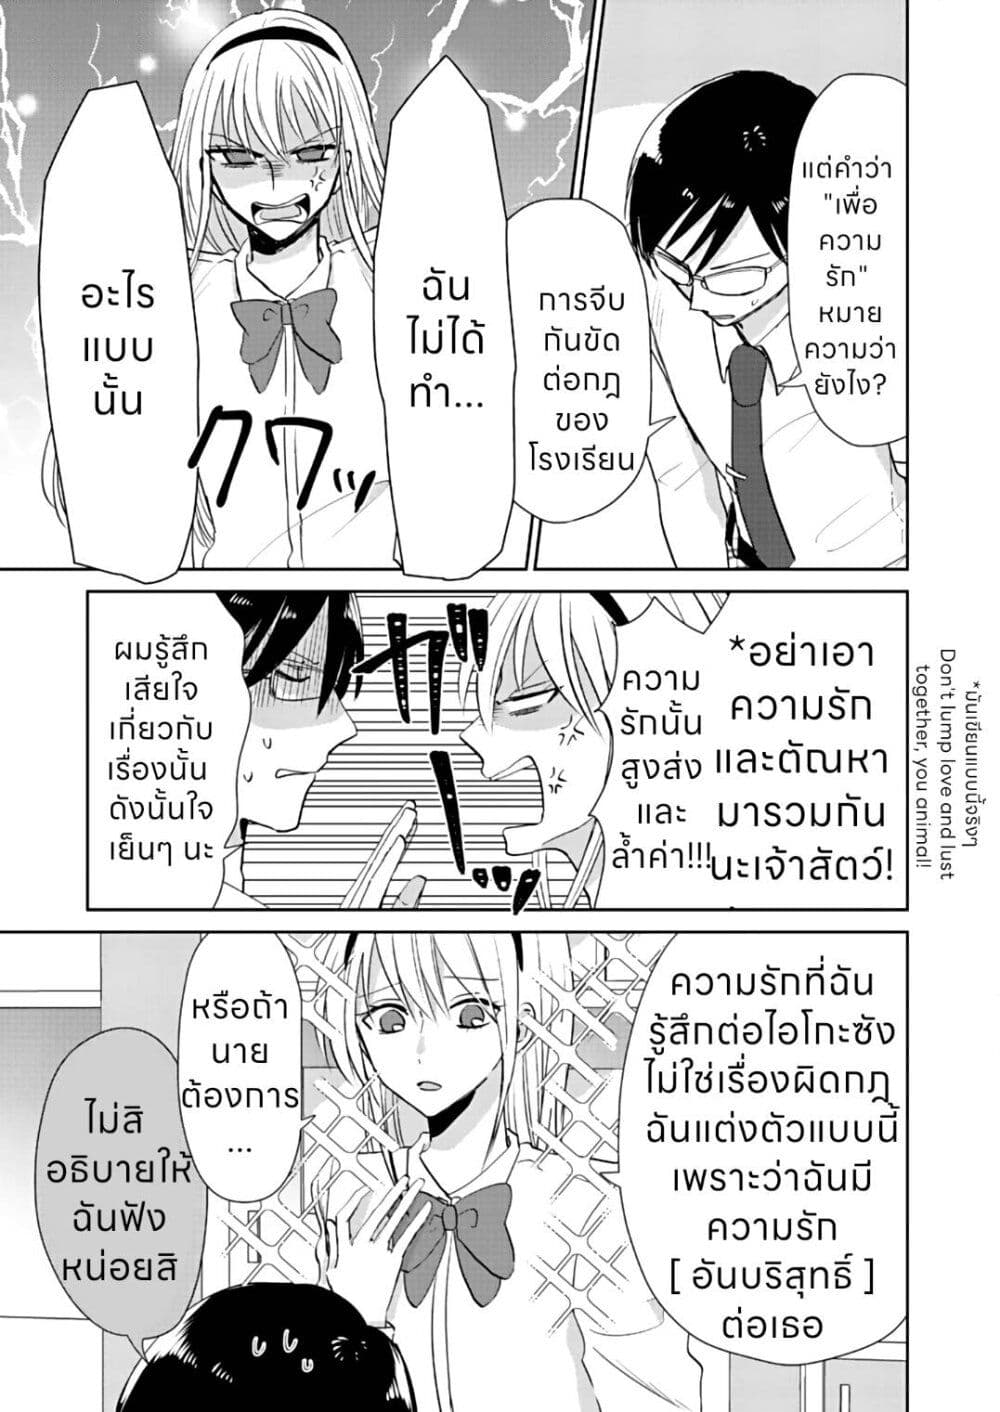 How to Start a Relationship With Crossdressing ตอนที่ 3 (10)